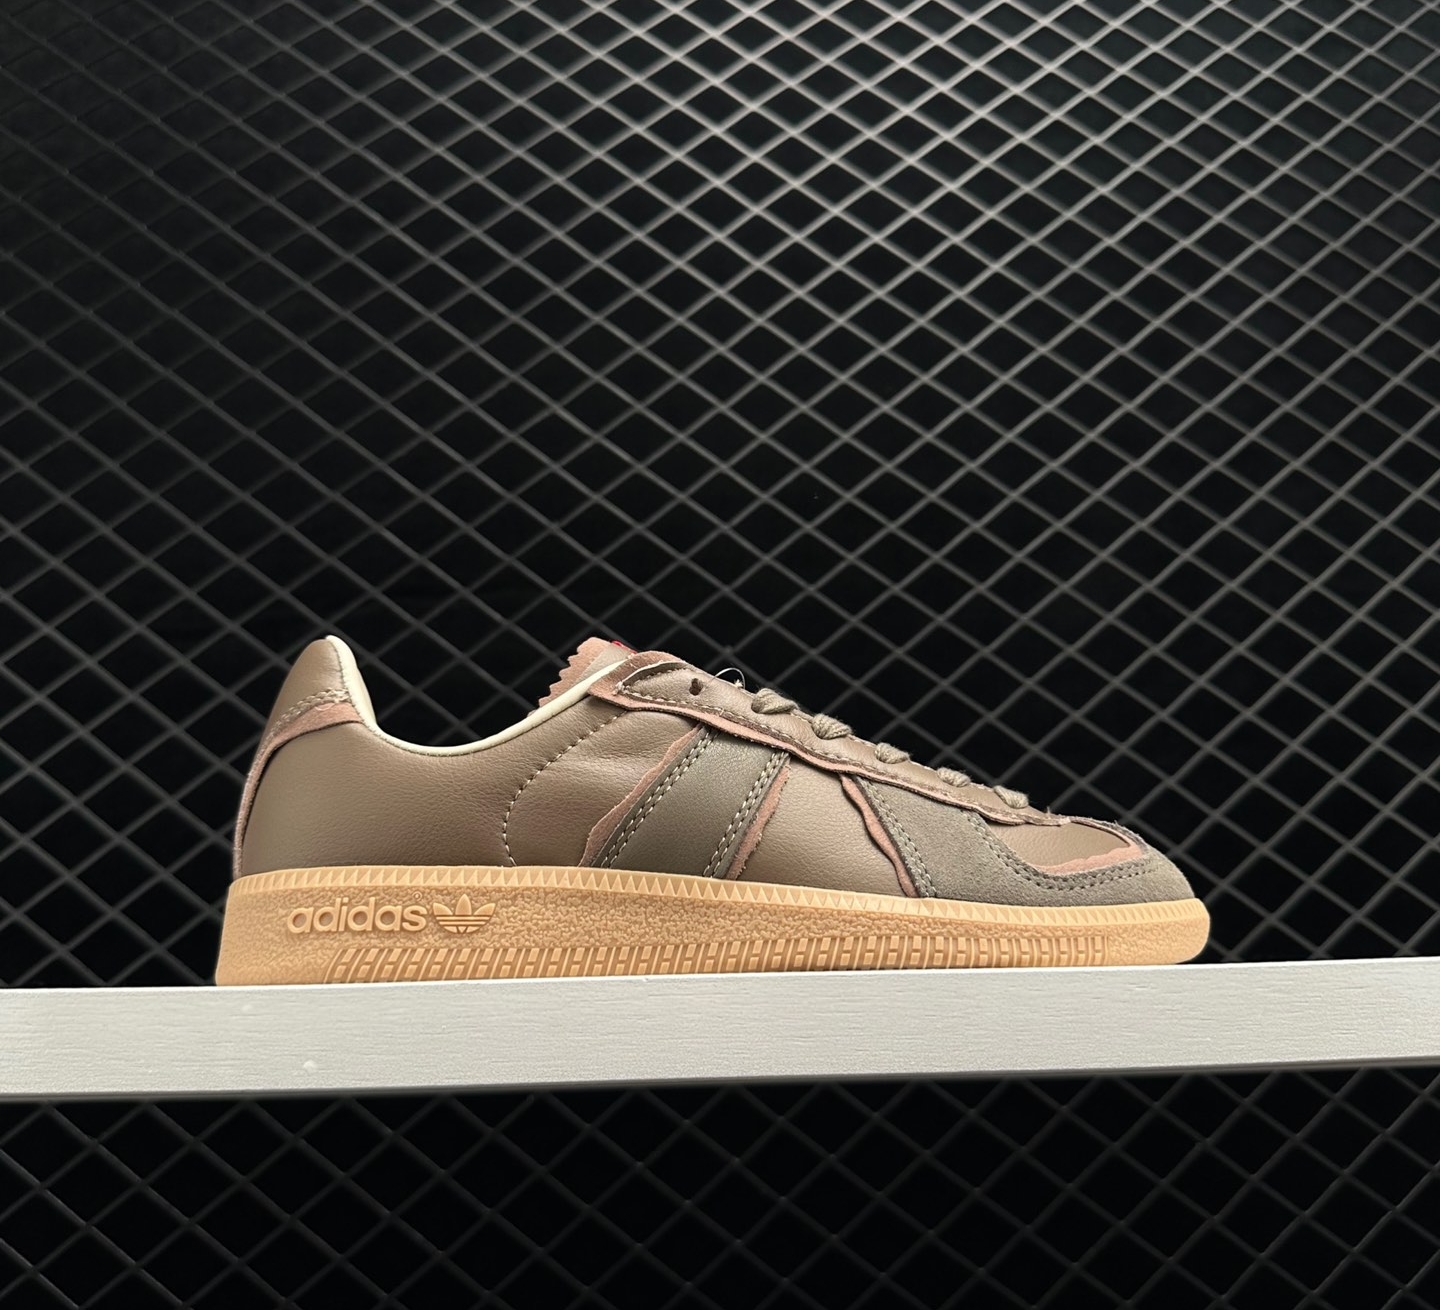 Adidas Originals BW Army Low Brown GY0017 - Classic Design with a Modern Twist